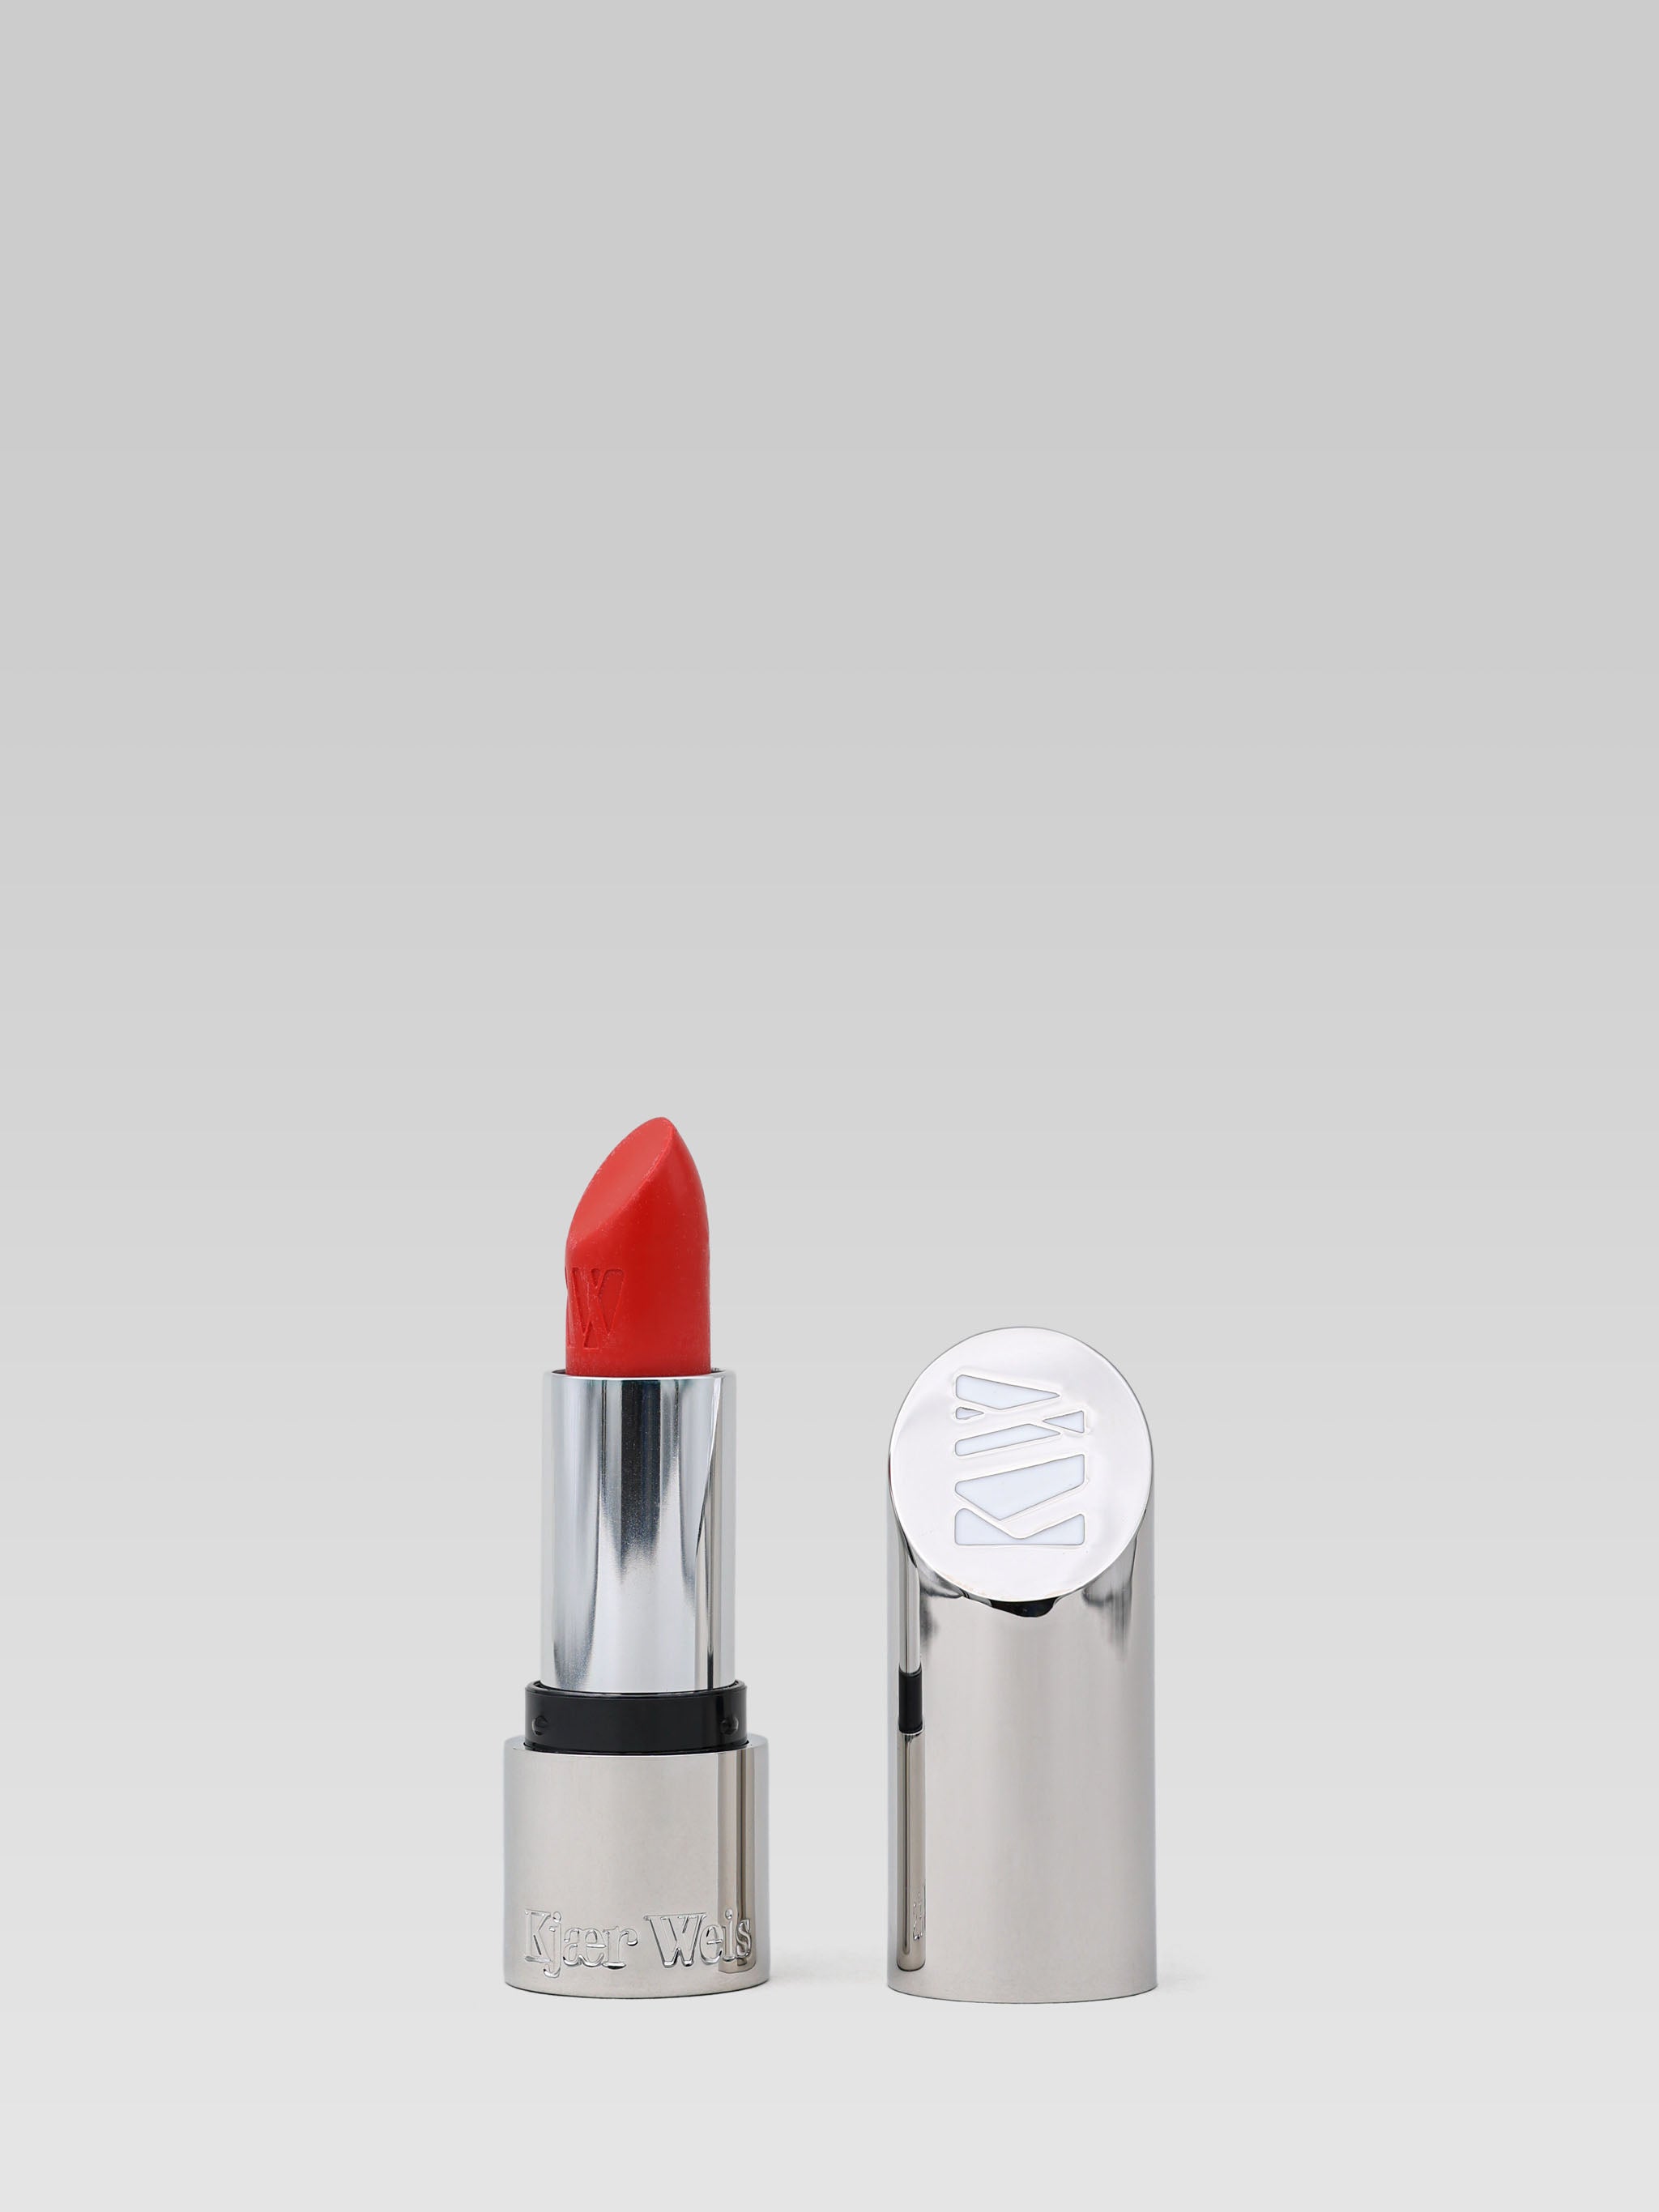 Kjaer Weis Lipstick in color Amour Rouge product shot